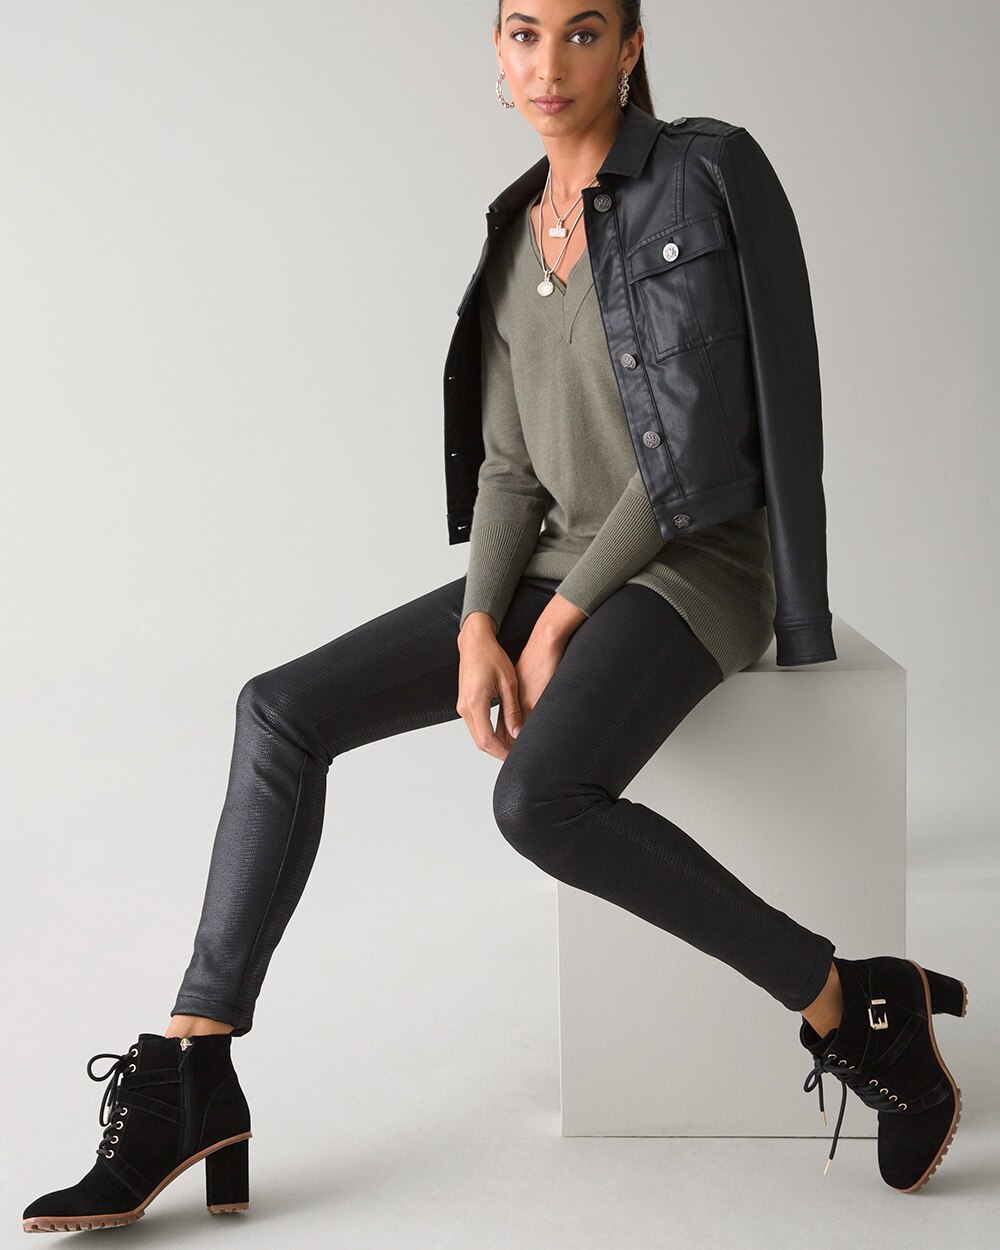 Textured Vegan Suede WHBM Runway Leggings video preview image, click to start video